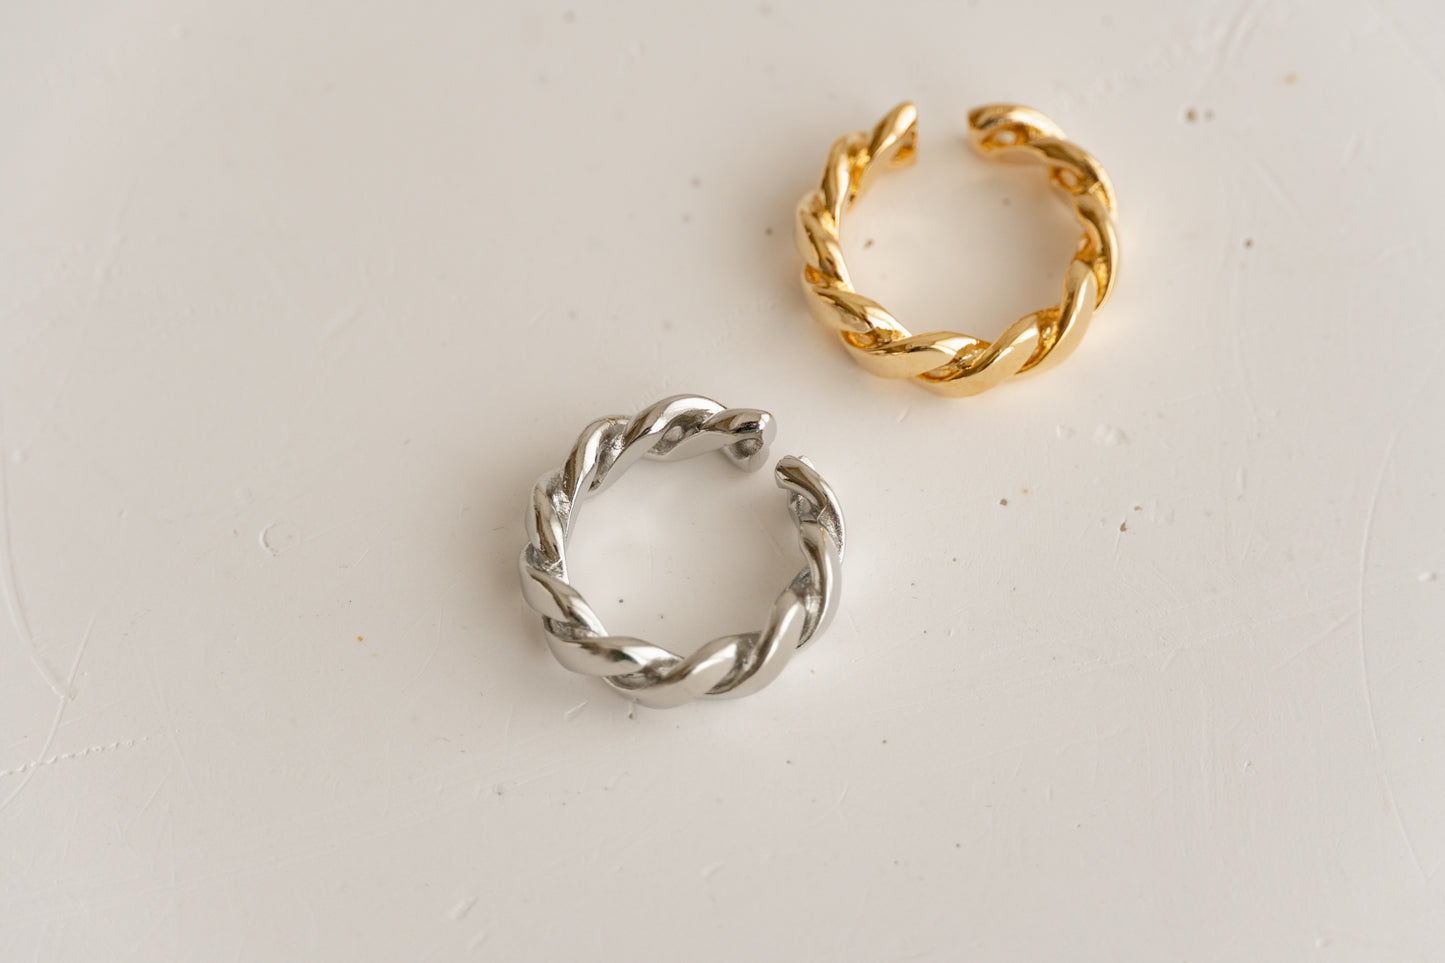 Adjustable Gold / Silver Chain Ring